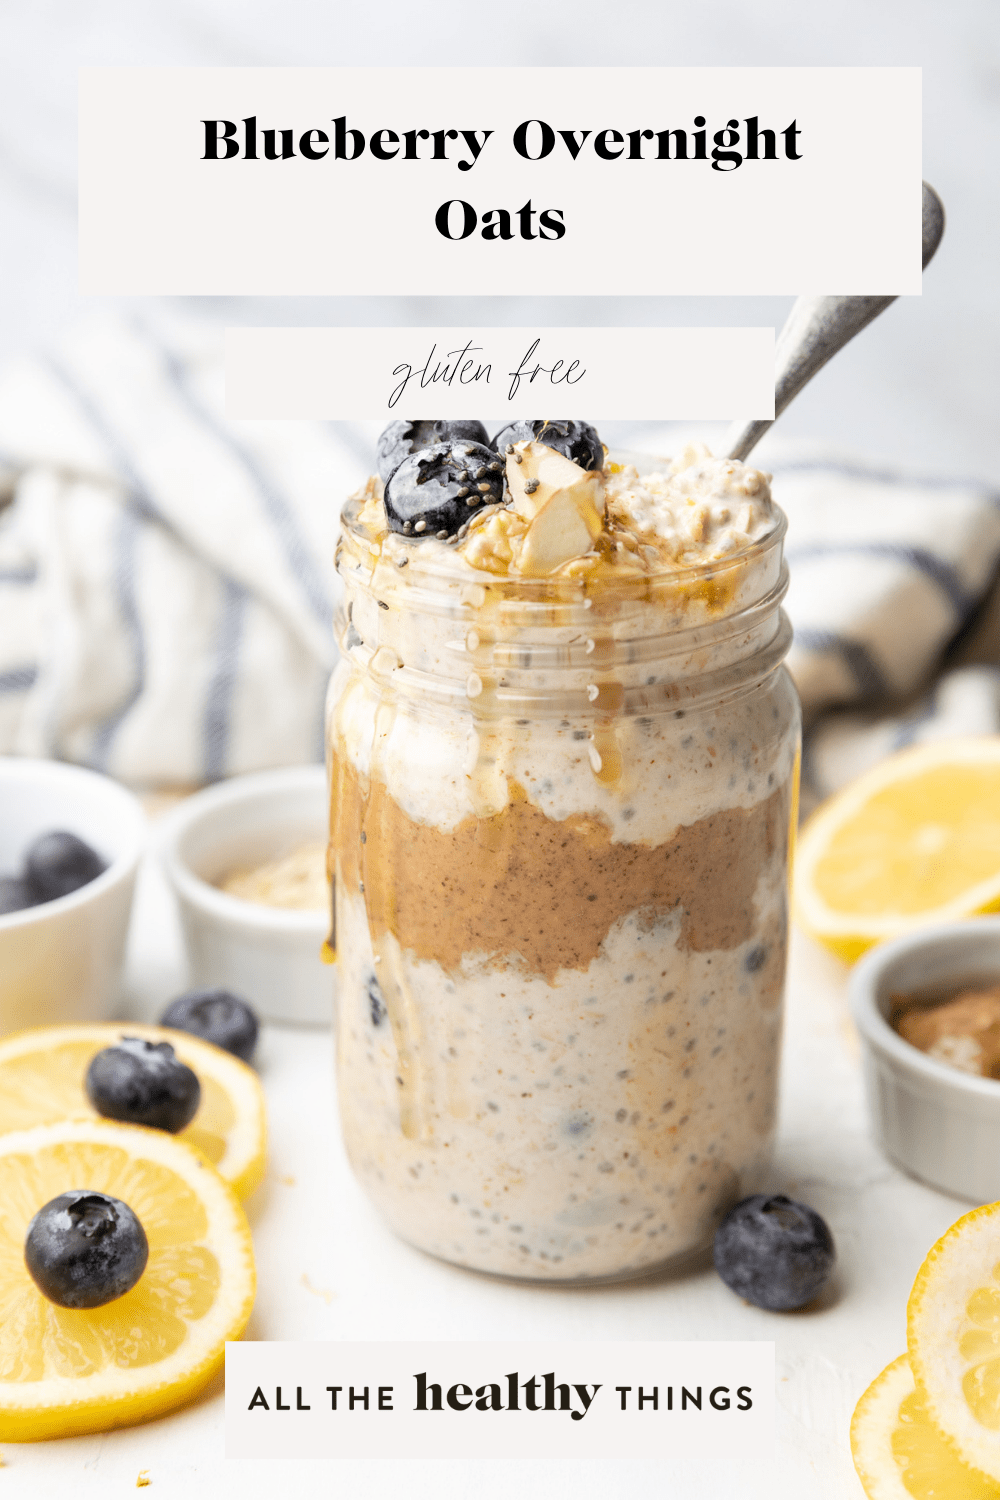 Blueberry Overnight Oats - All the Healthy Things